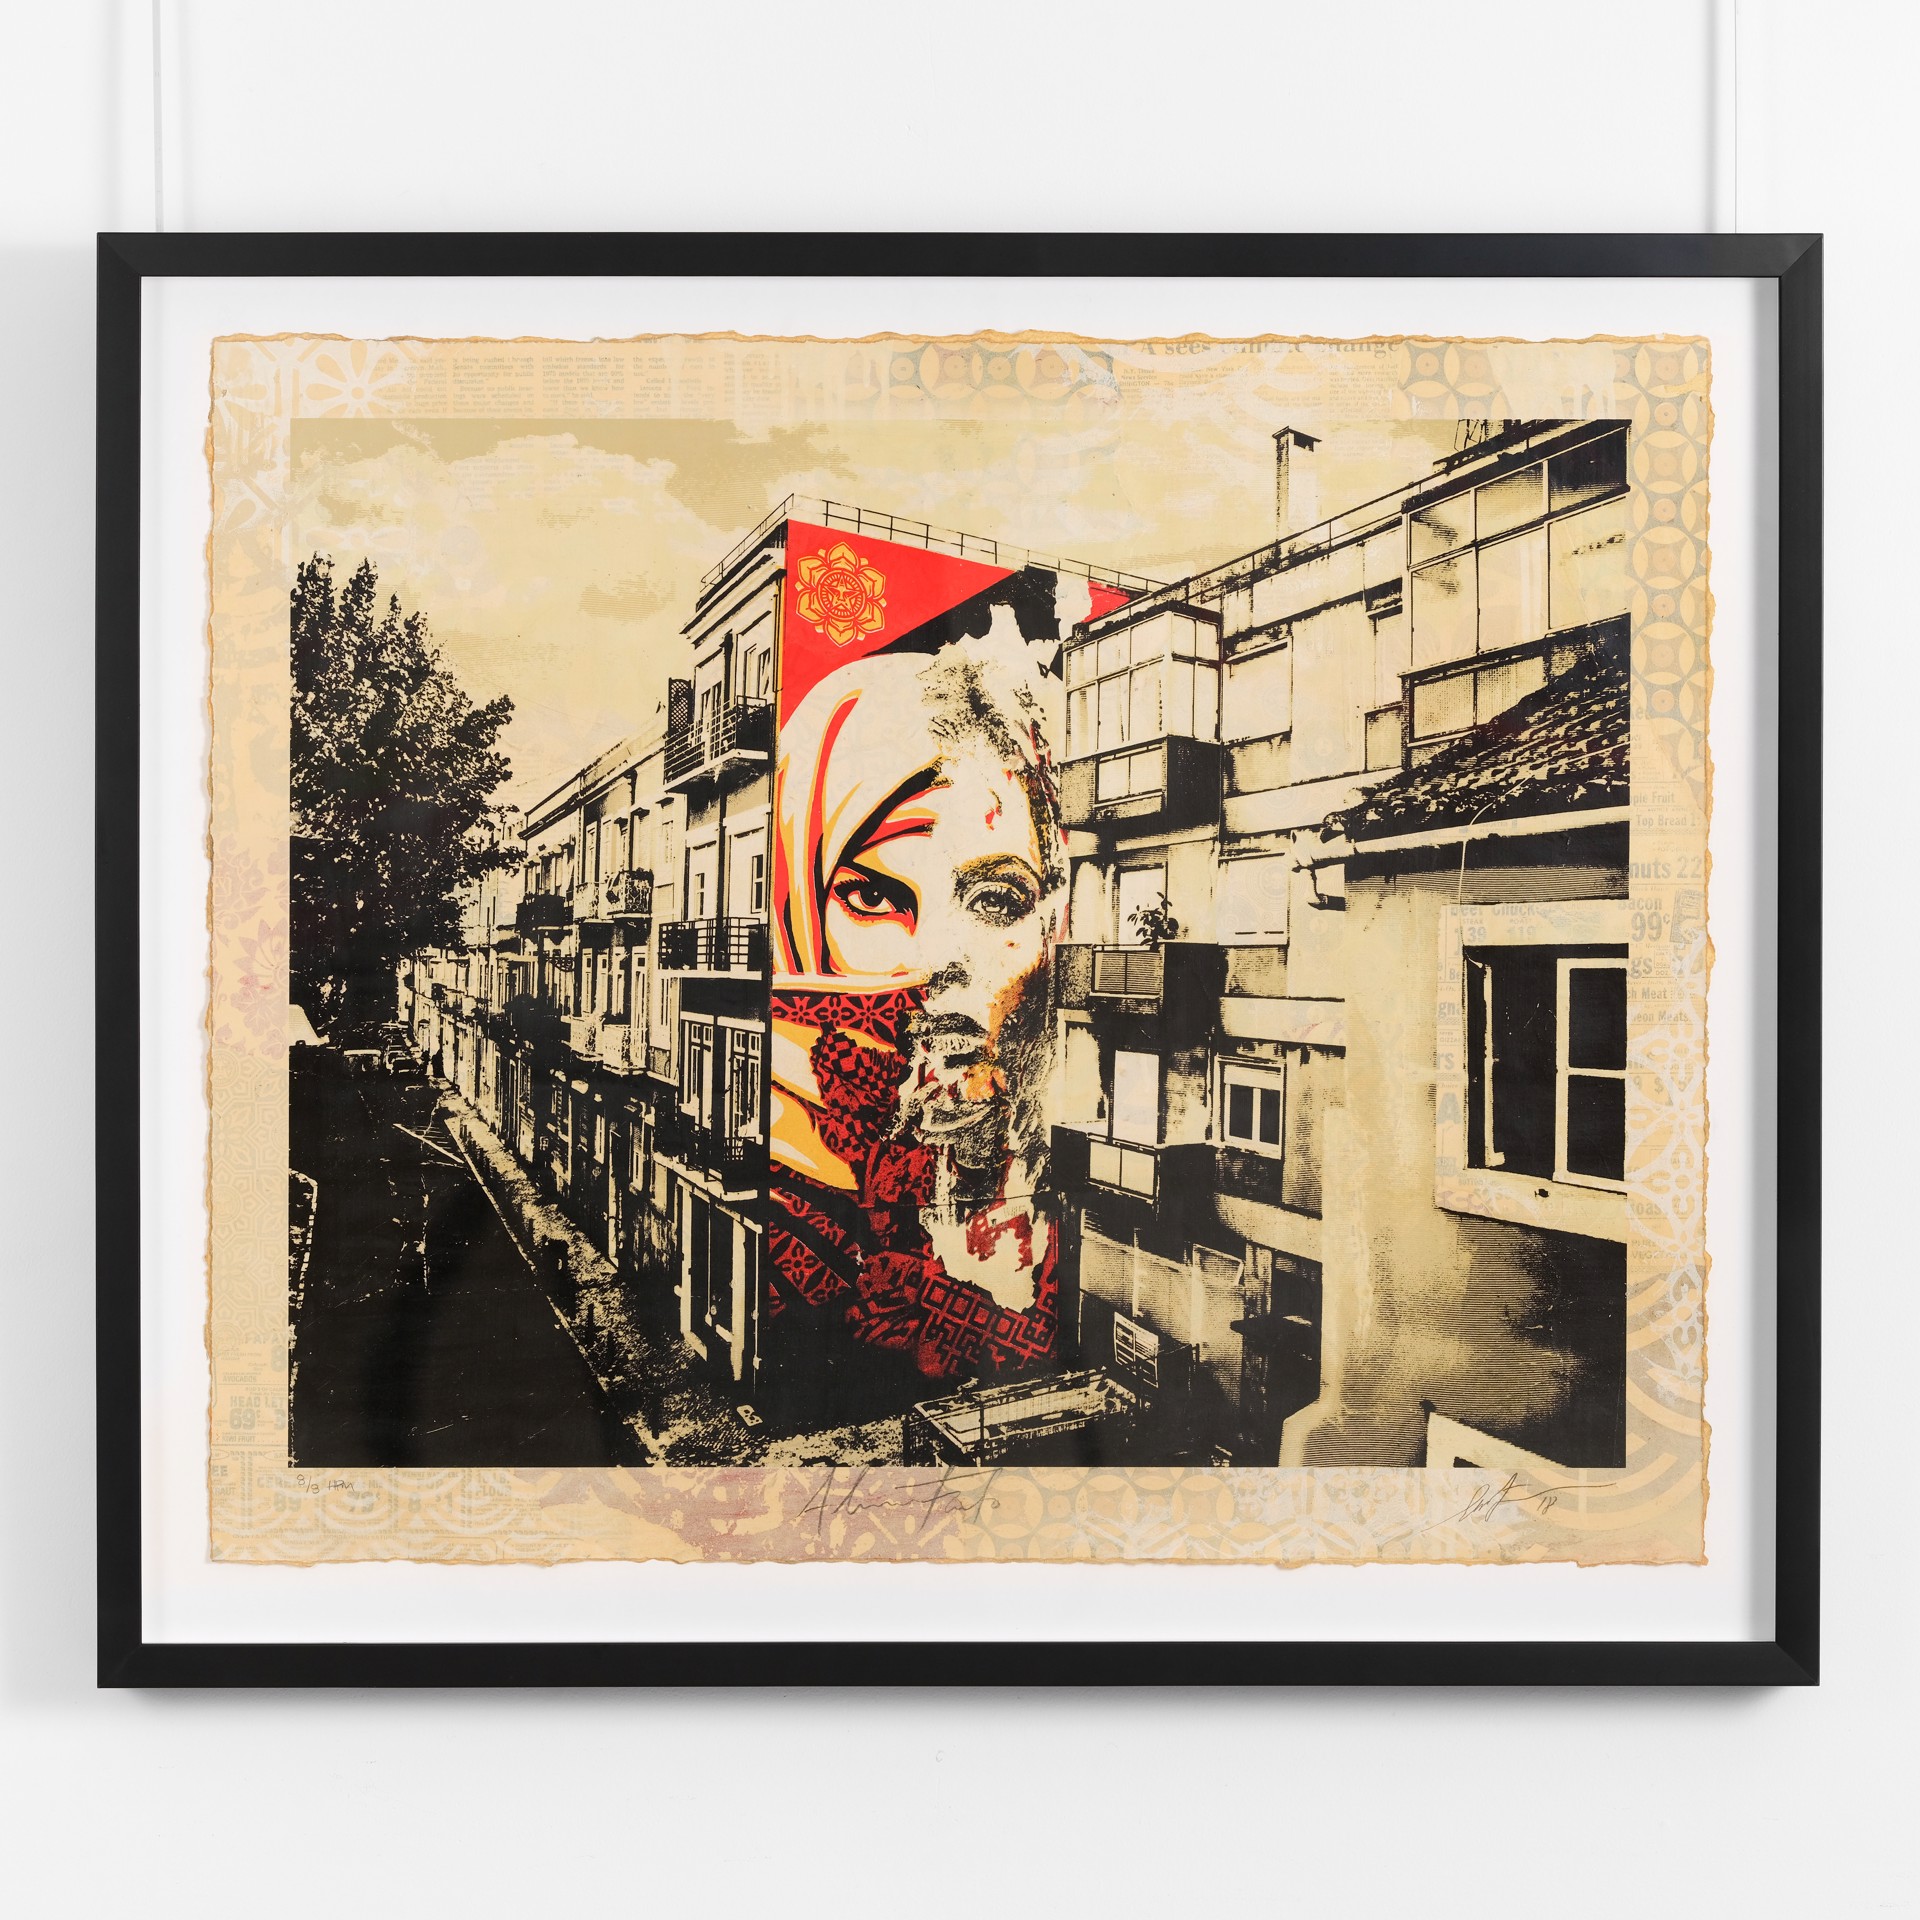 OBEY/Vhils Universal Personhood Lisbon by Shepard Fairey / Limited editions